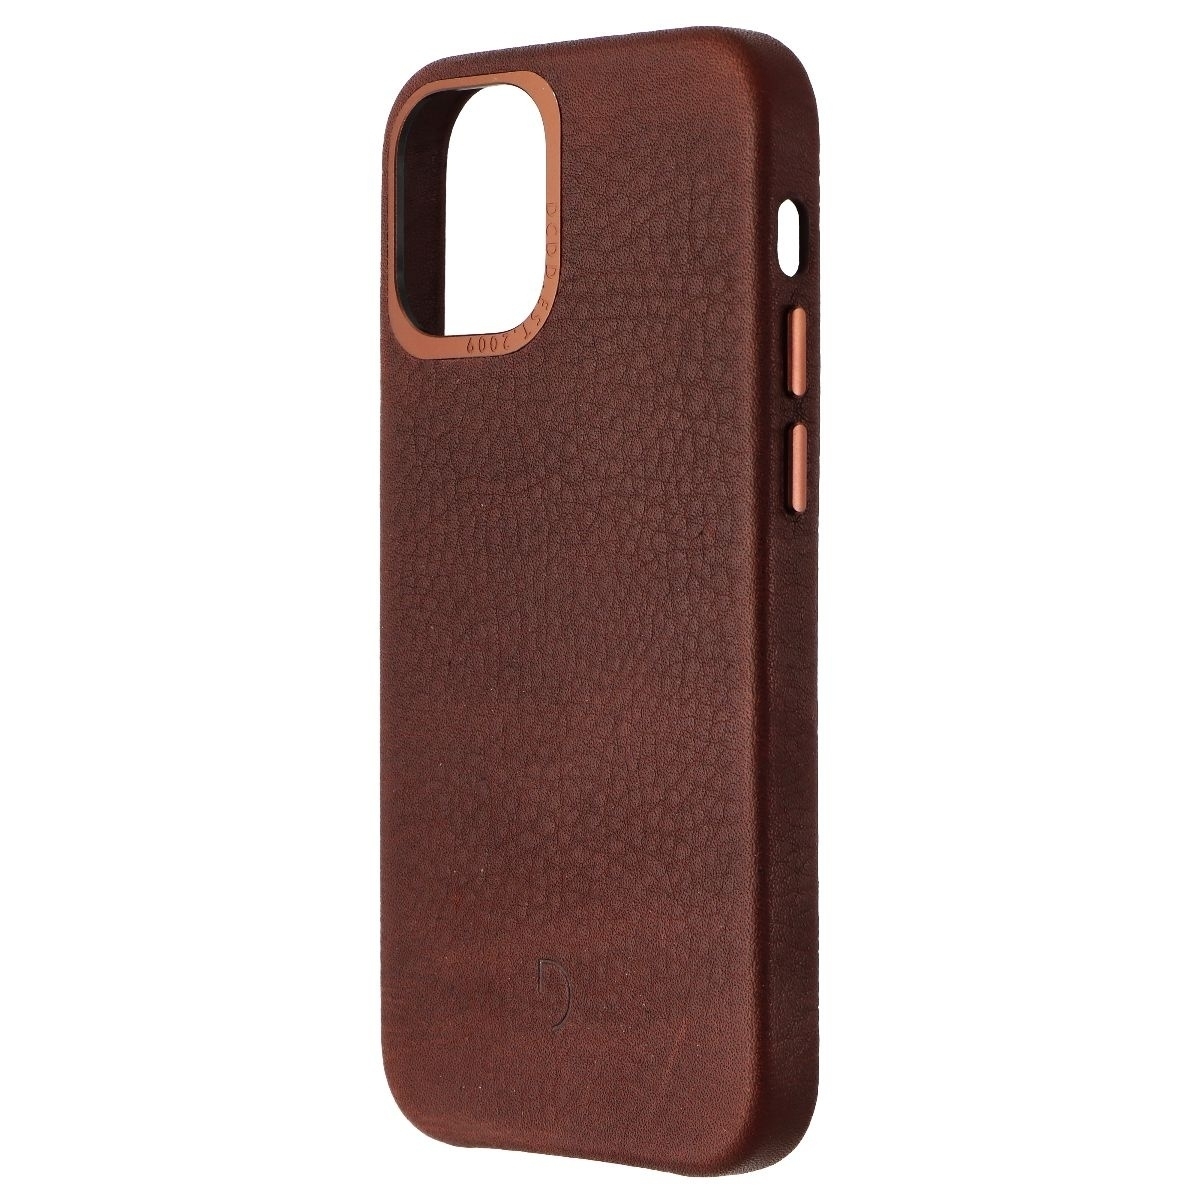 DECODED Back Cover Case For Apple IPhone 12 Mini - Cinnamon Brown